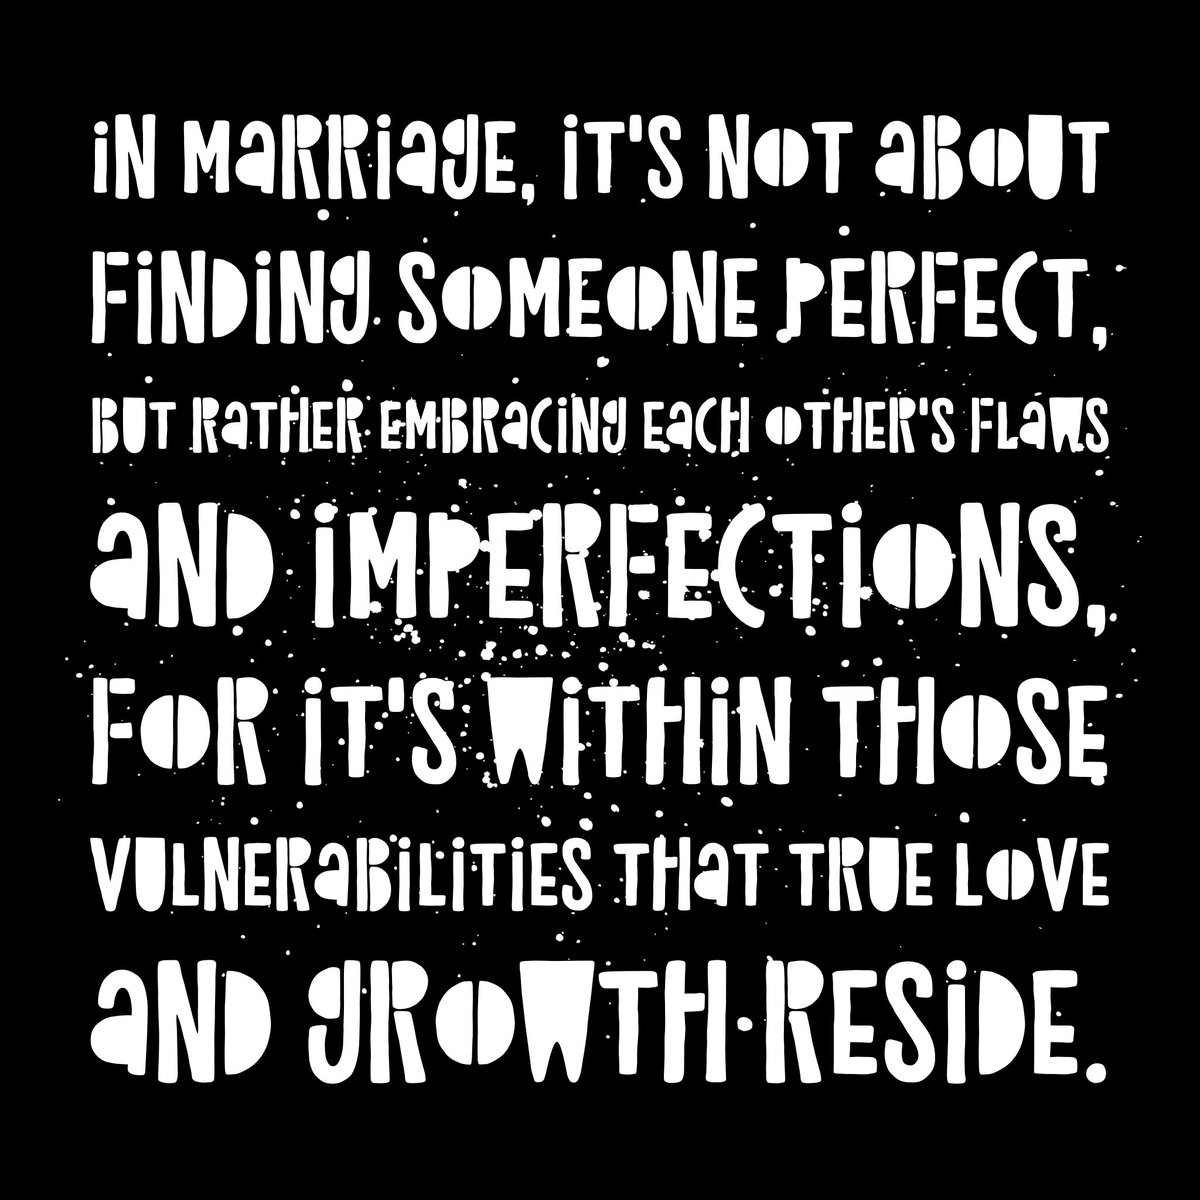 Marriage Hack: Instead of trying to change each other, embrace imperfections and flaws as part of what makes your marriage unique and beautiful. #marriagehacks #LoveInAllItsForms 💖